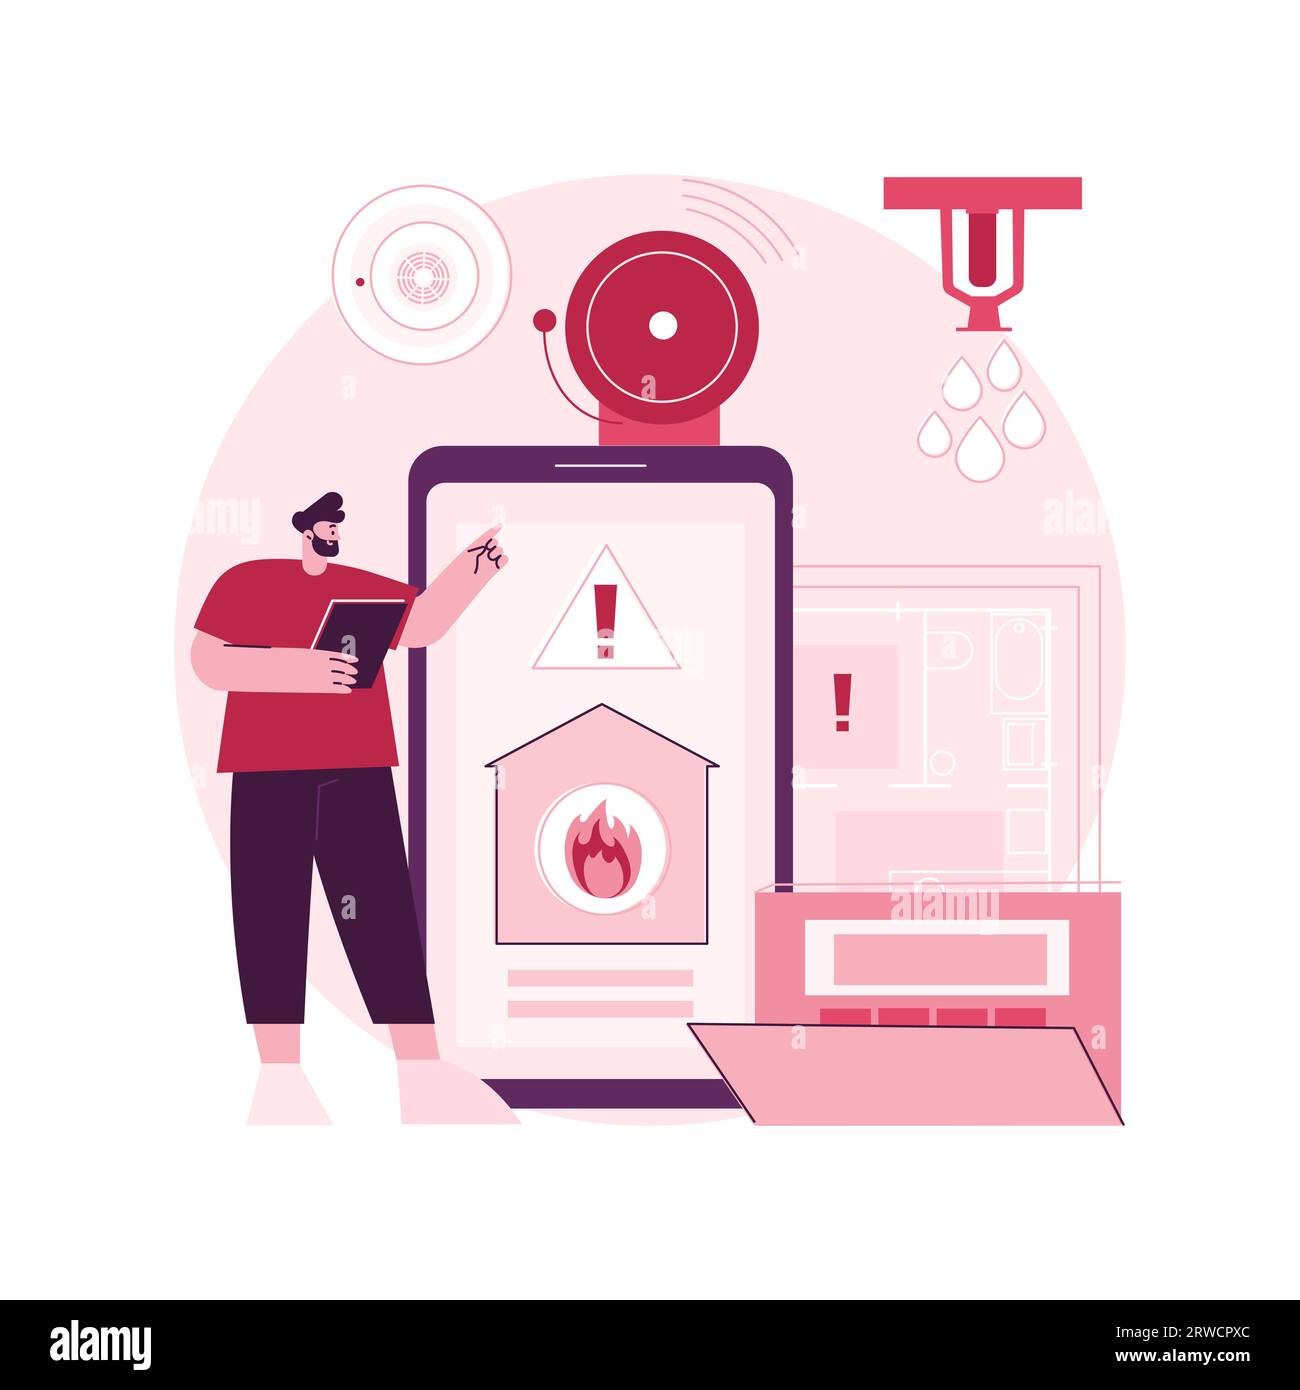 Fire alarm system abstract concept vector illustration. Fire alarm component, system installation, prevention method, smoke sensor, building protection project, emergency plan abstract metaphor. Stock Vector